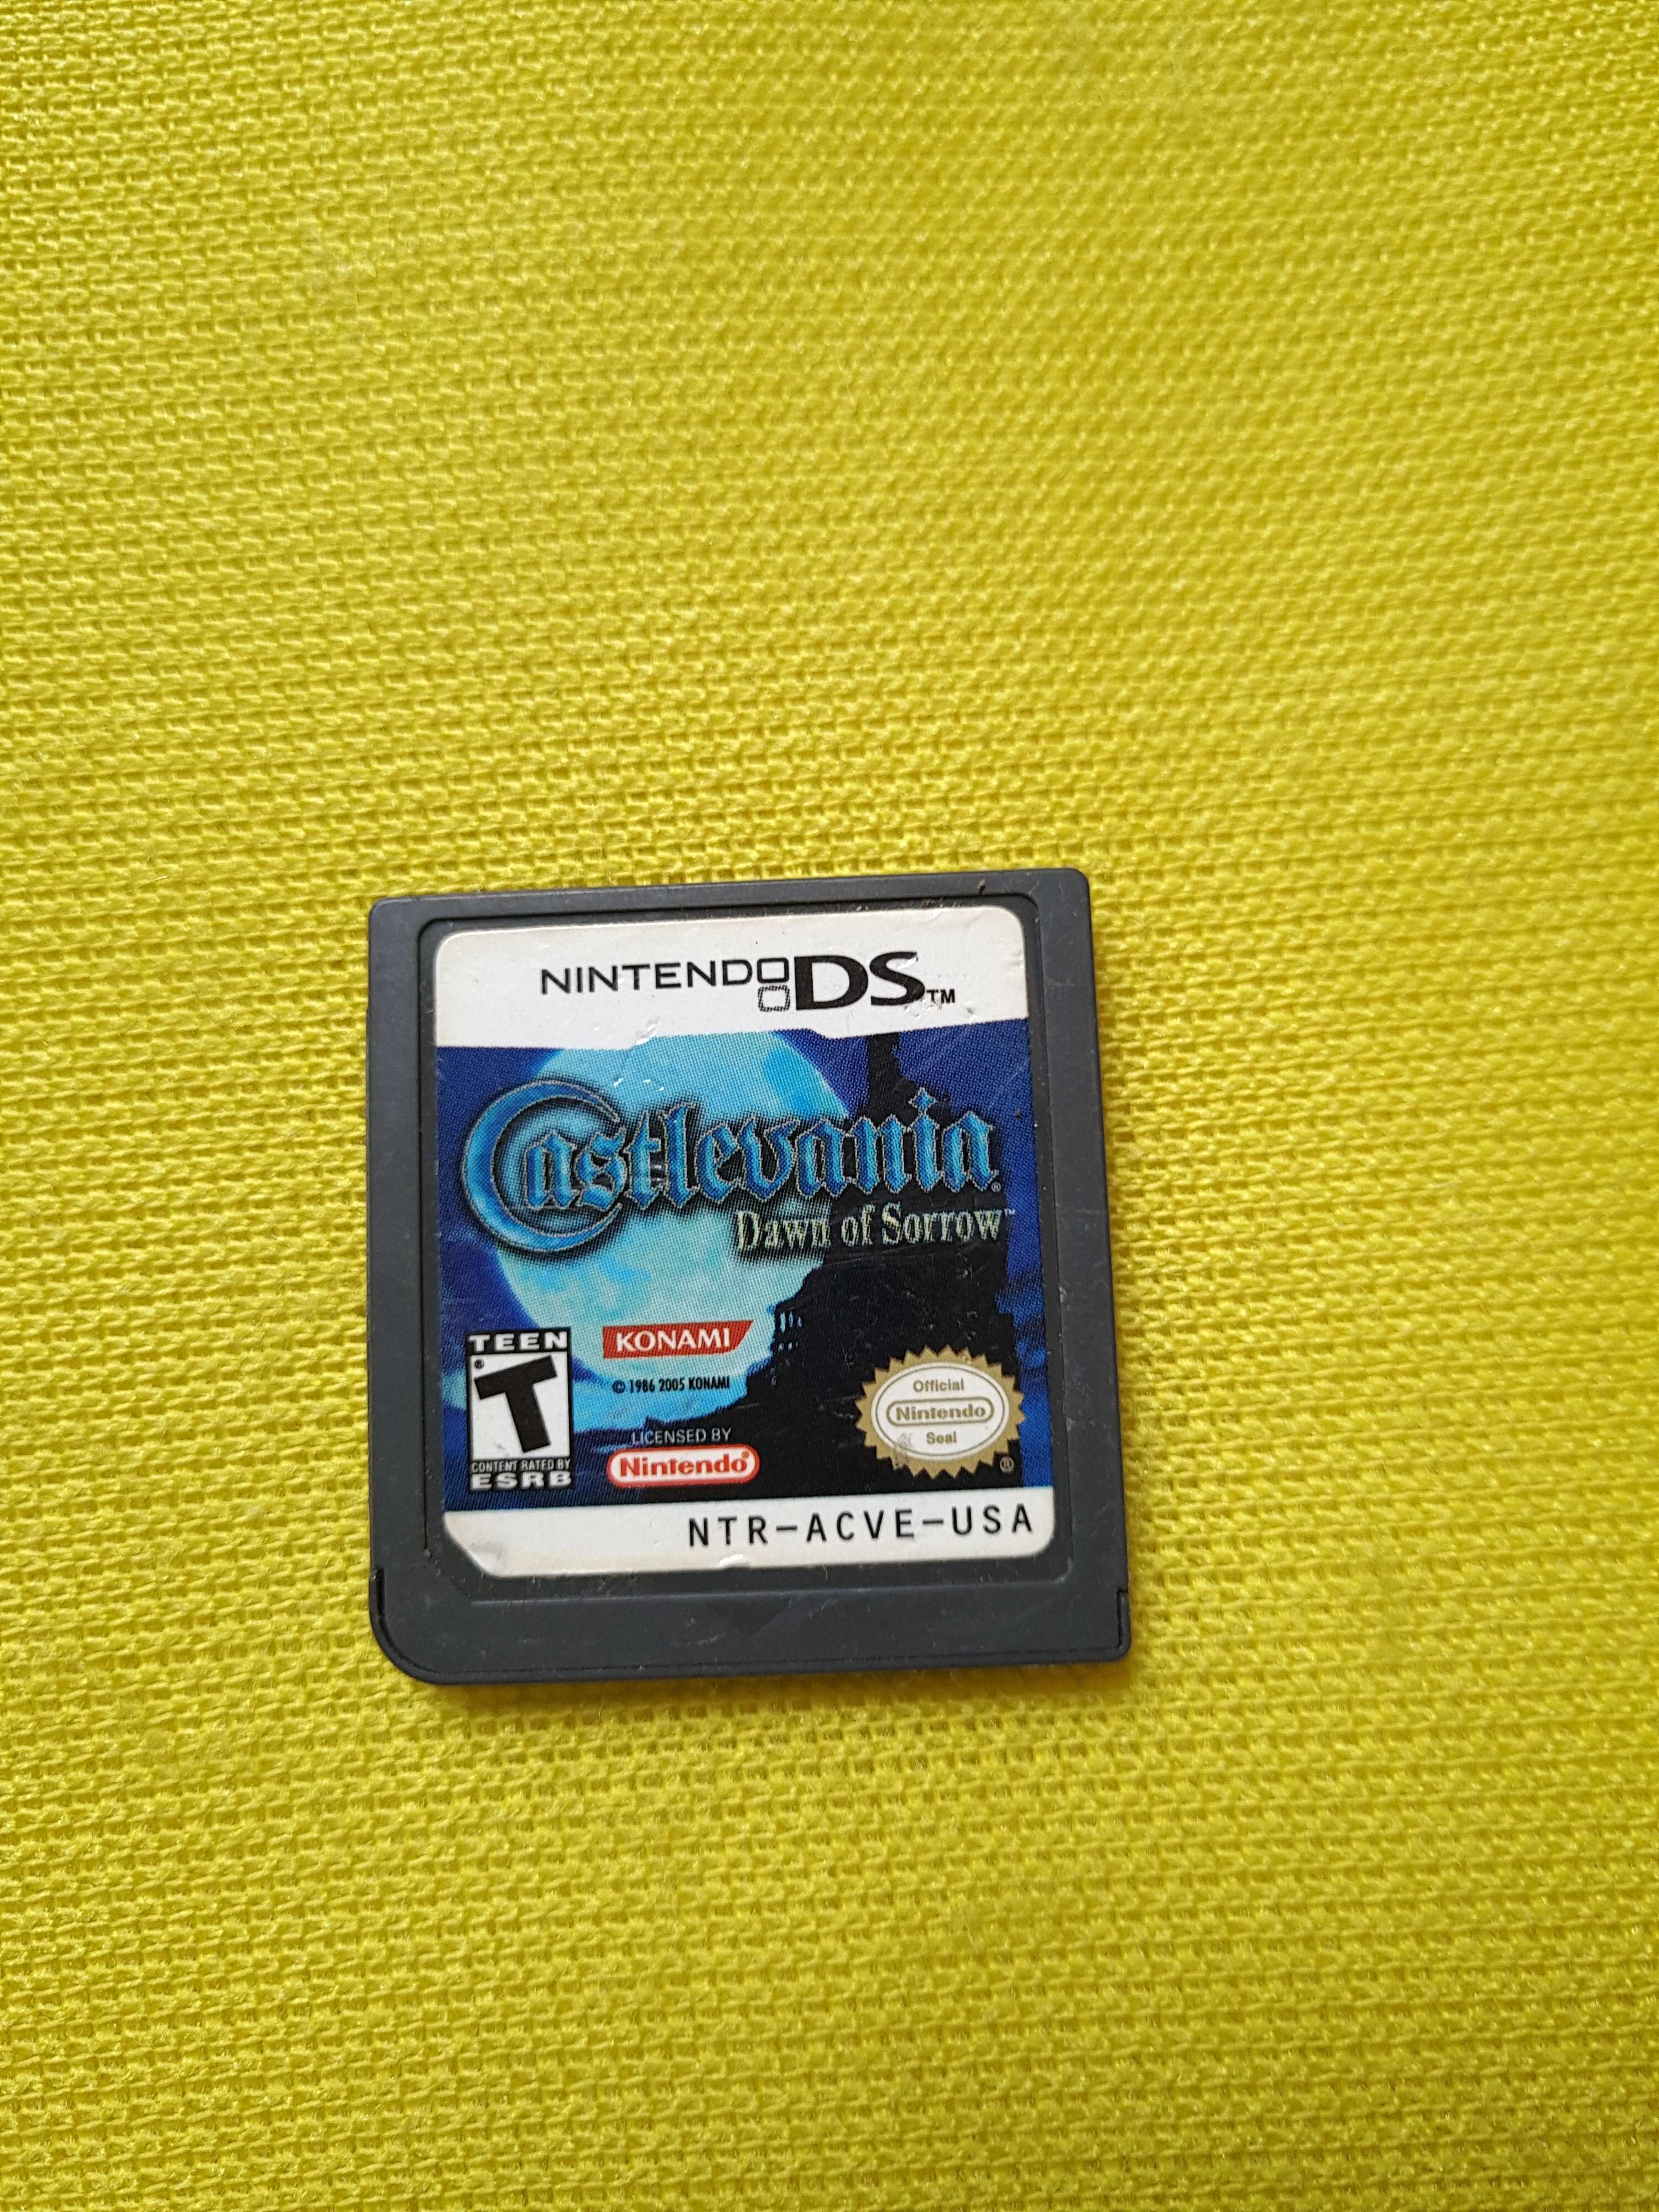 NDS DEMON CITY BEAUTY EDITION GENUINE